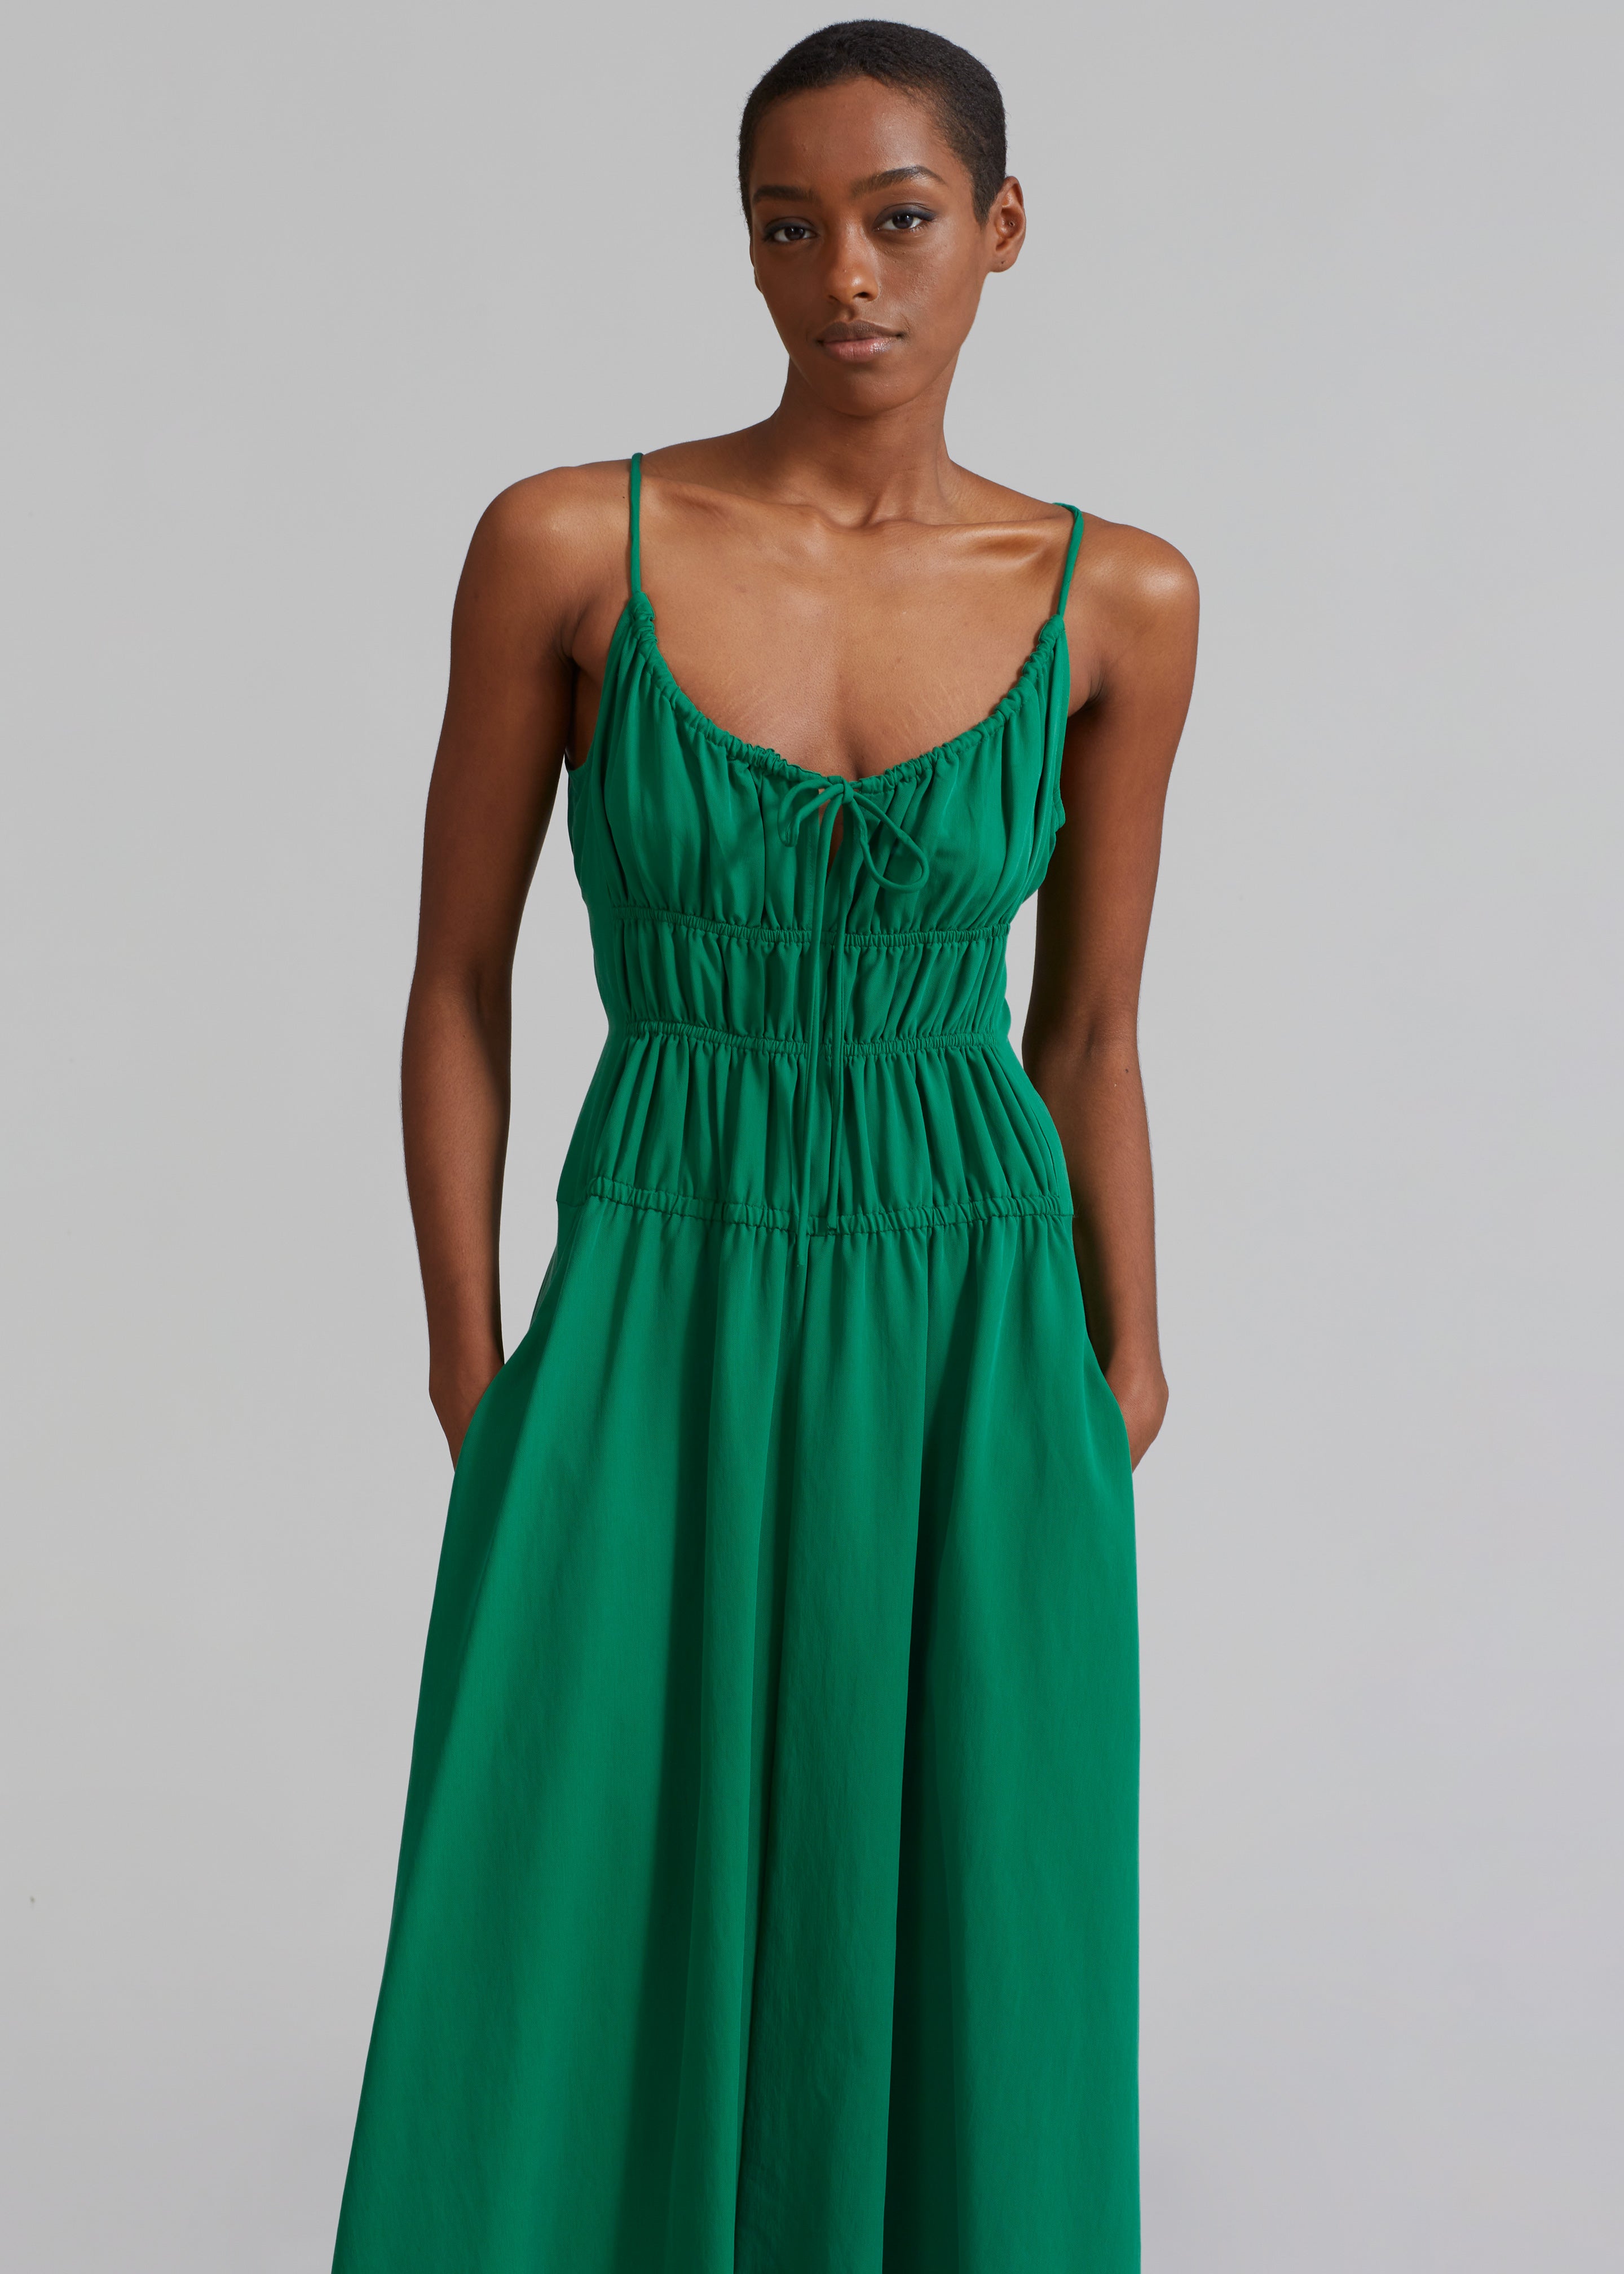 Proenza Schouler White Label Drapey Suiting Ruched Dress - Green - 4